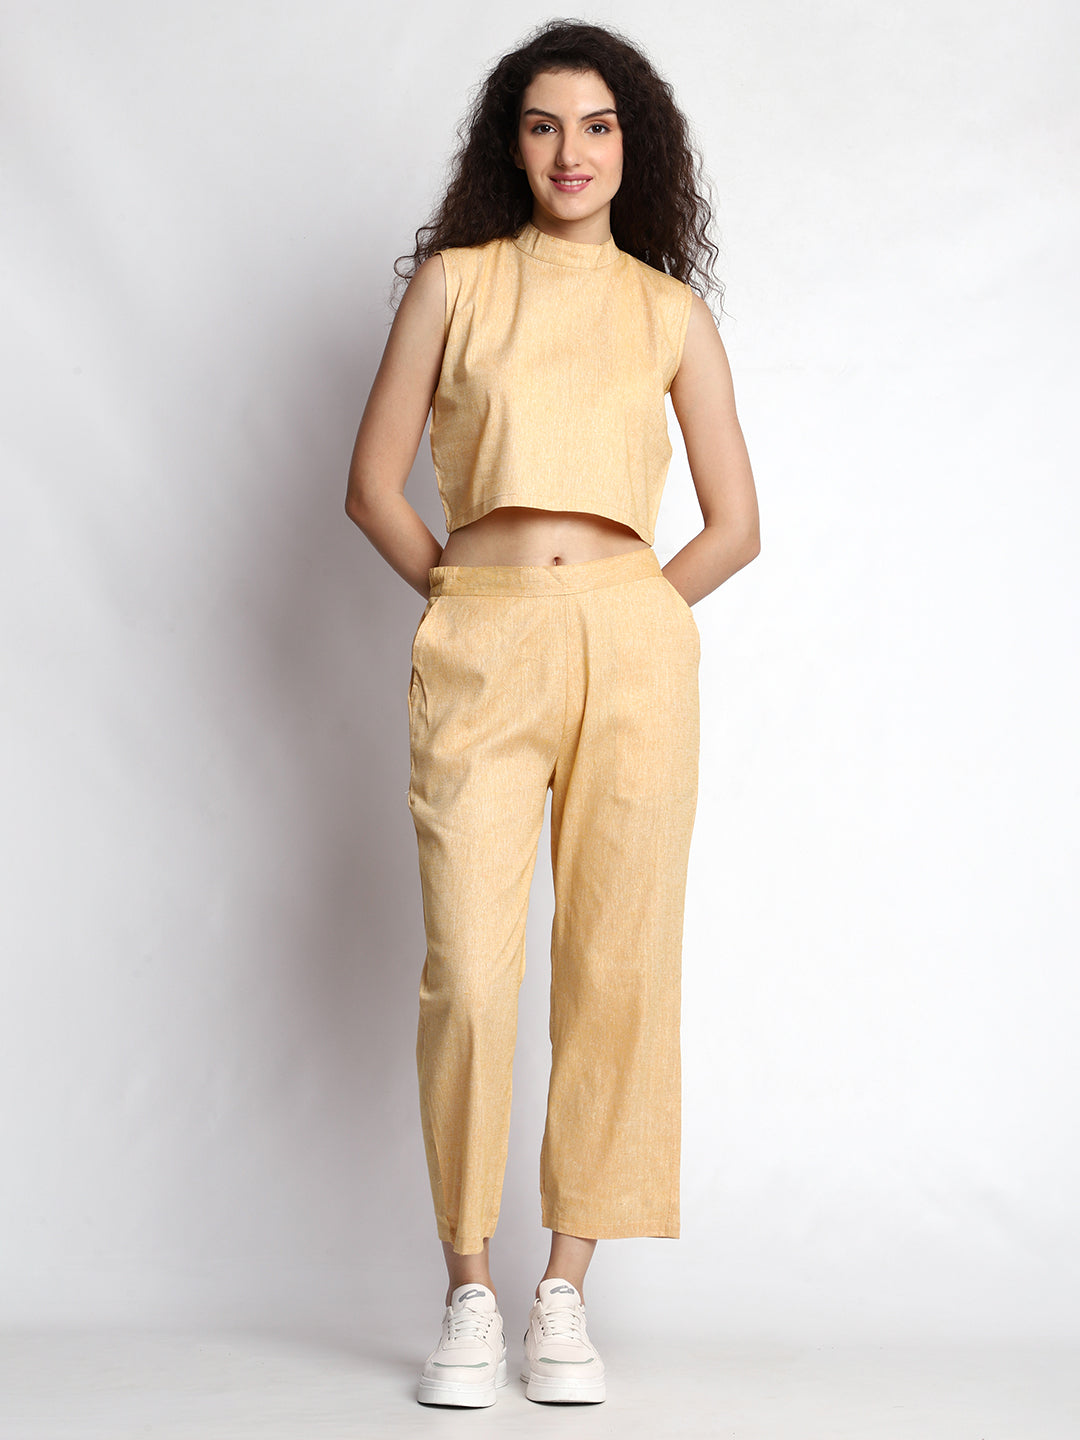 Yellow Chic Sleeveless Crop Top Co-ord Set